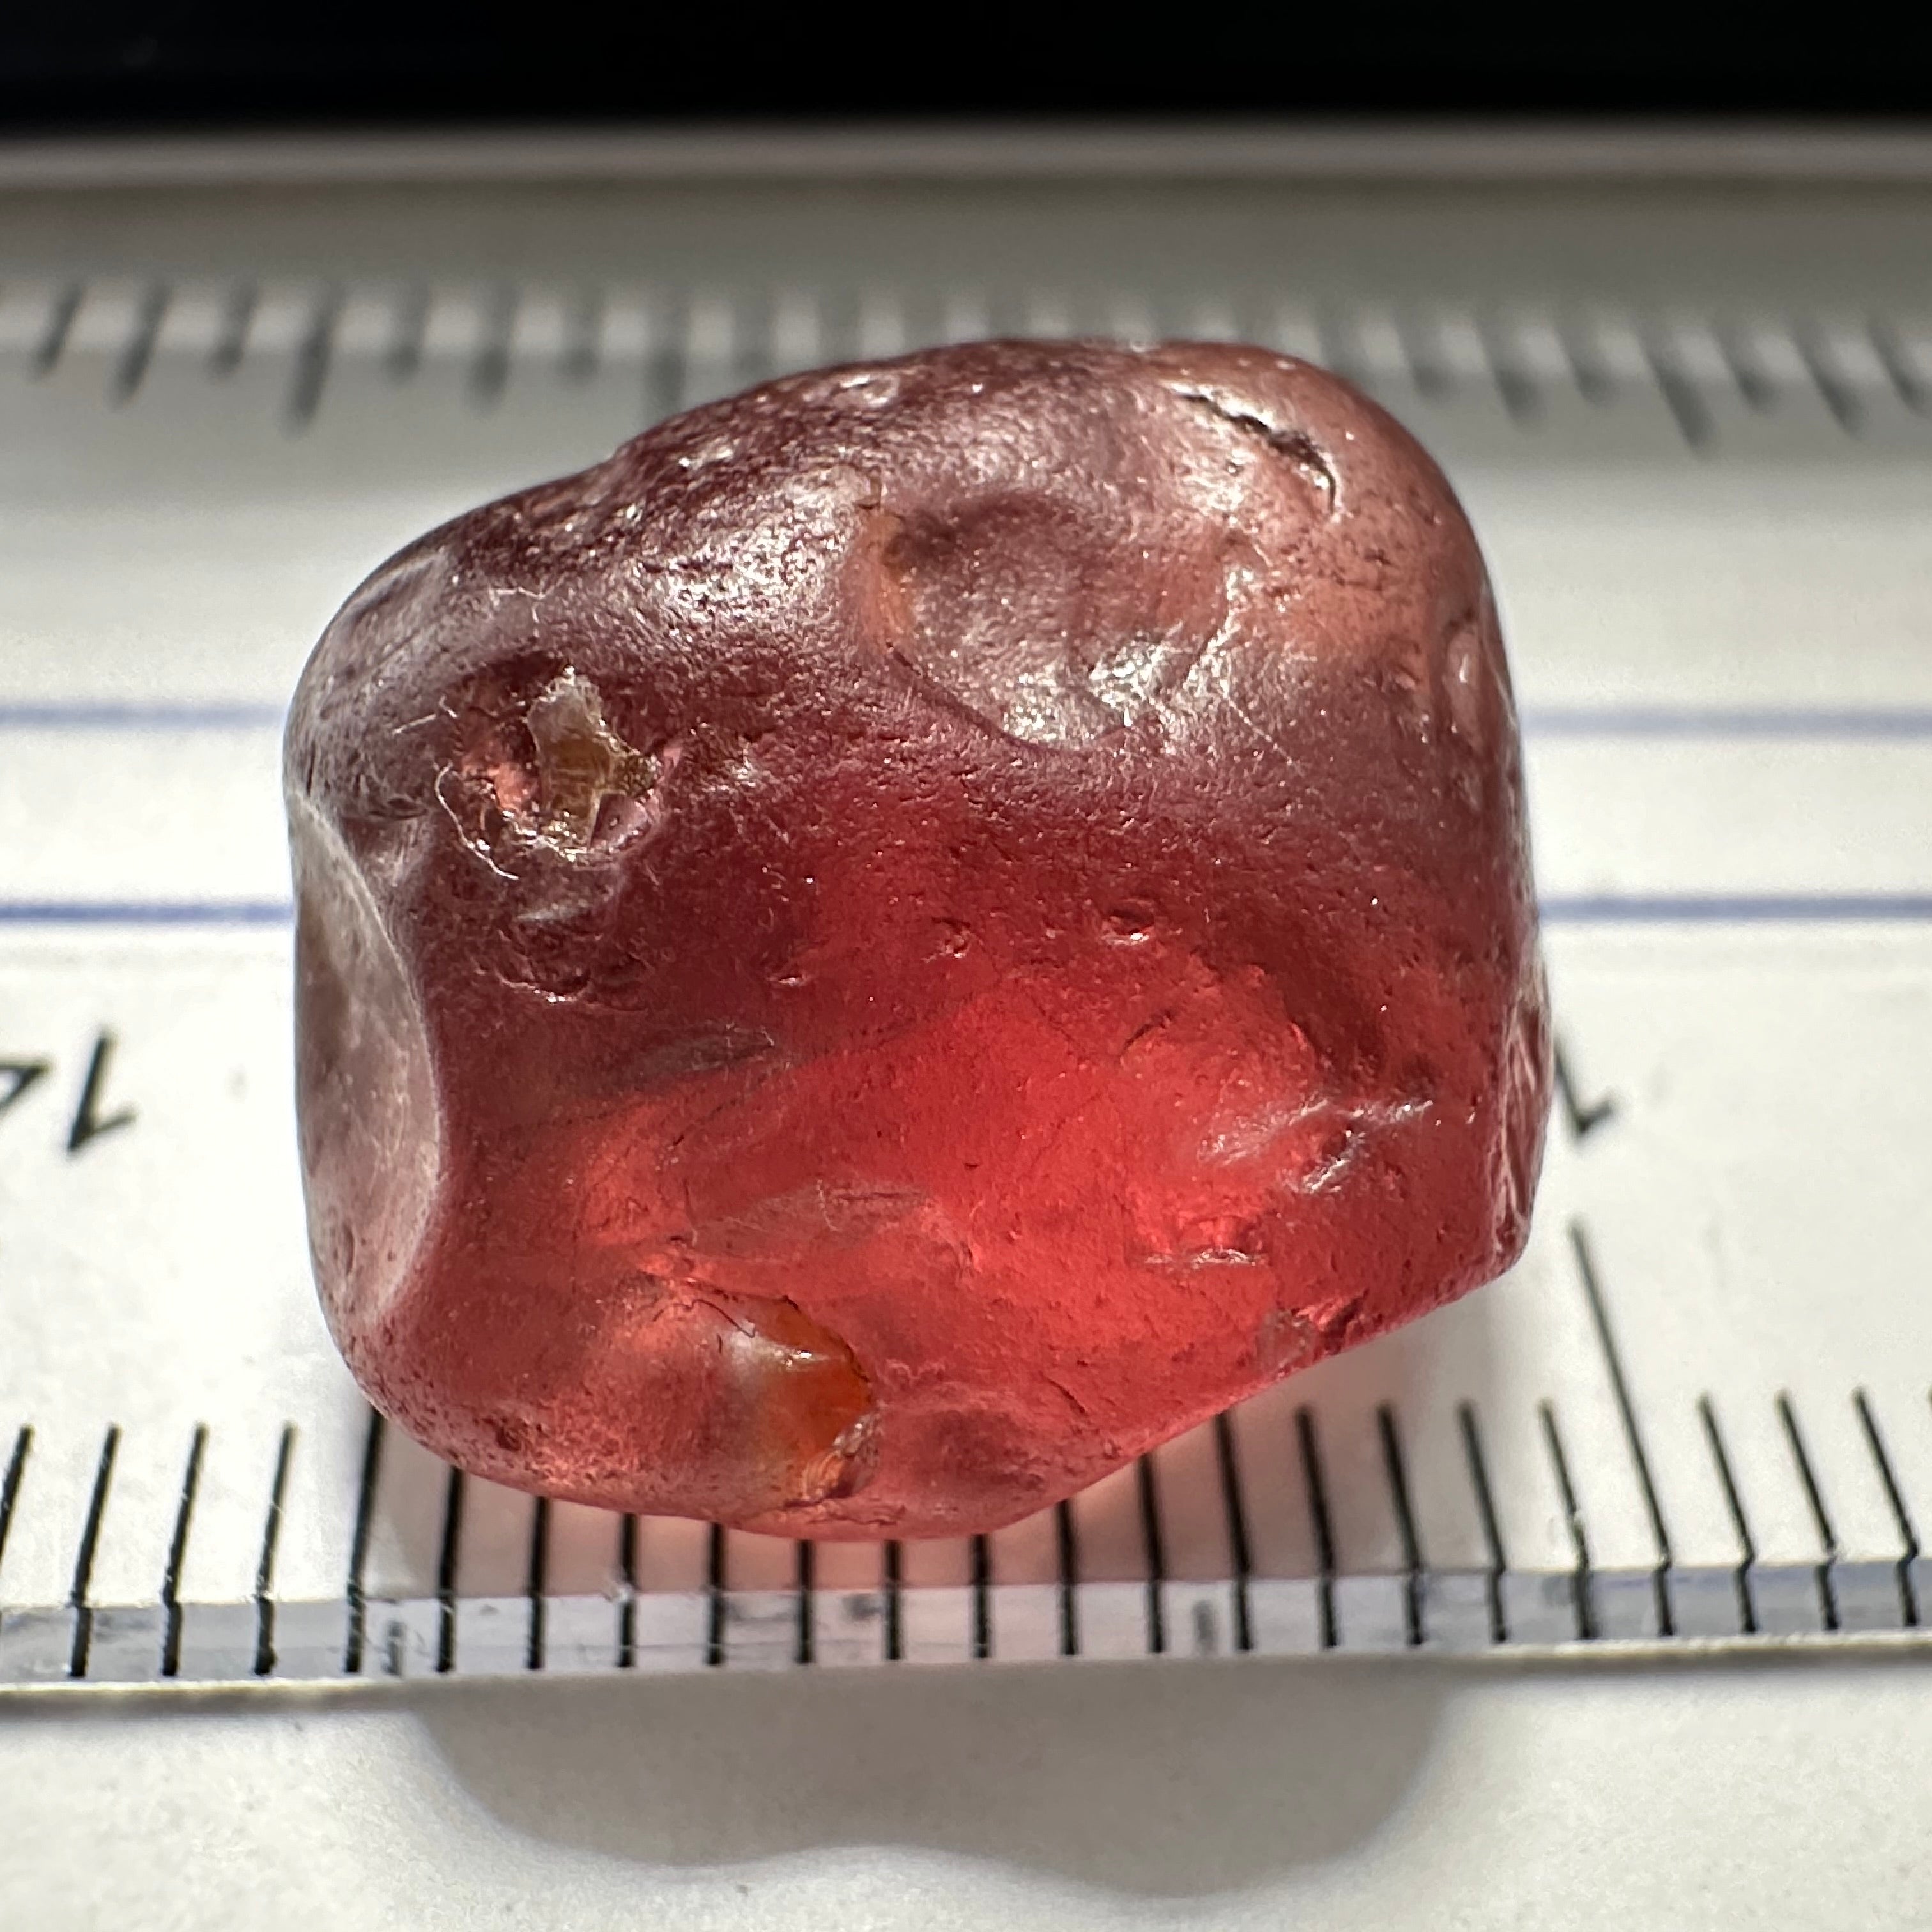 21.25ct Colour shift Garnet, Umba Valley, Tanzania, Untreated Unheated. 2 tiny white spots and silk in the stone. See the video where it shows a window into the side for positioning of the 2 spots